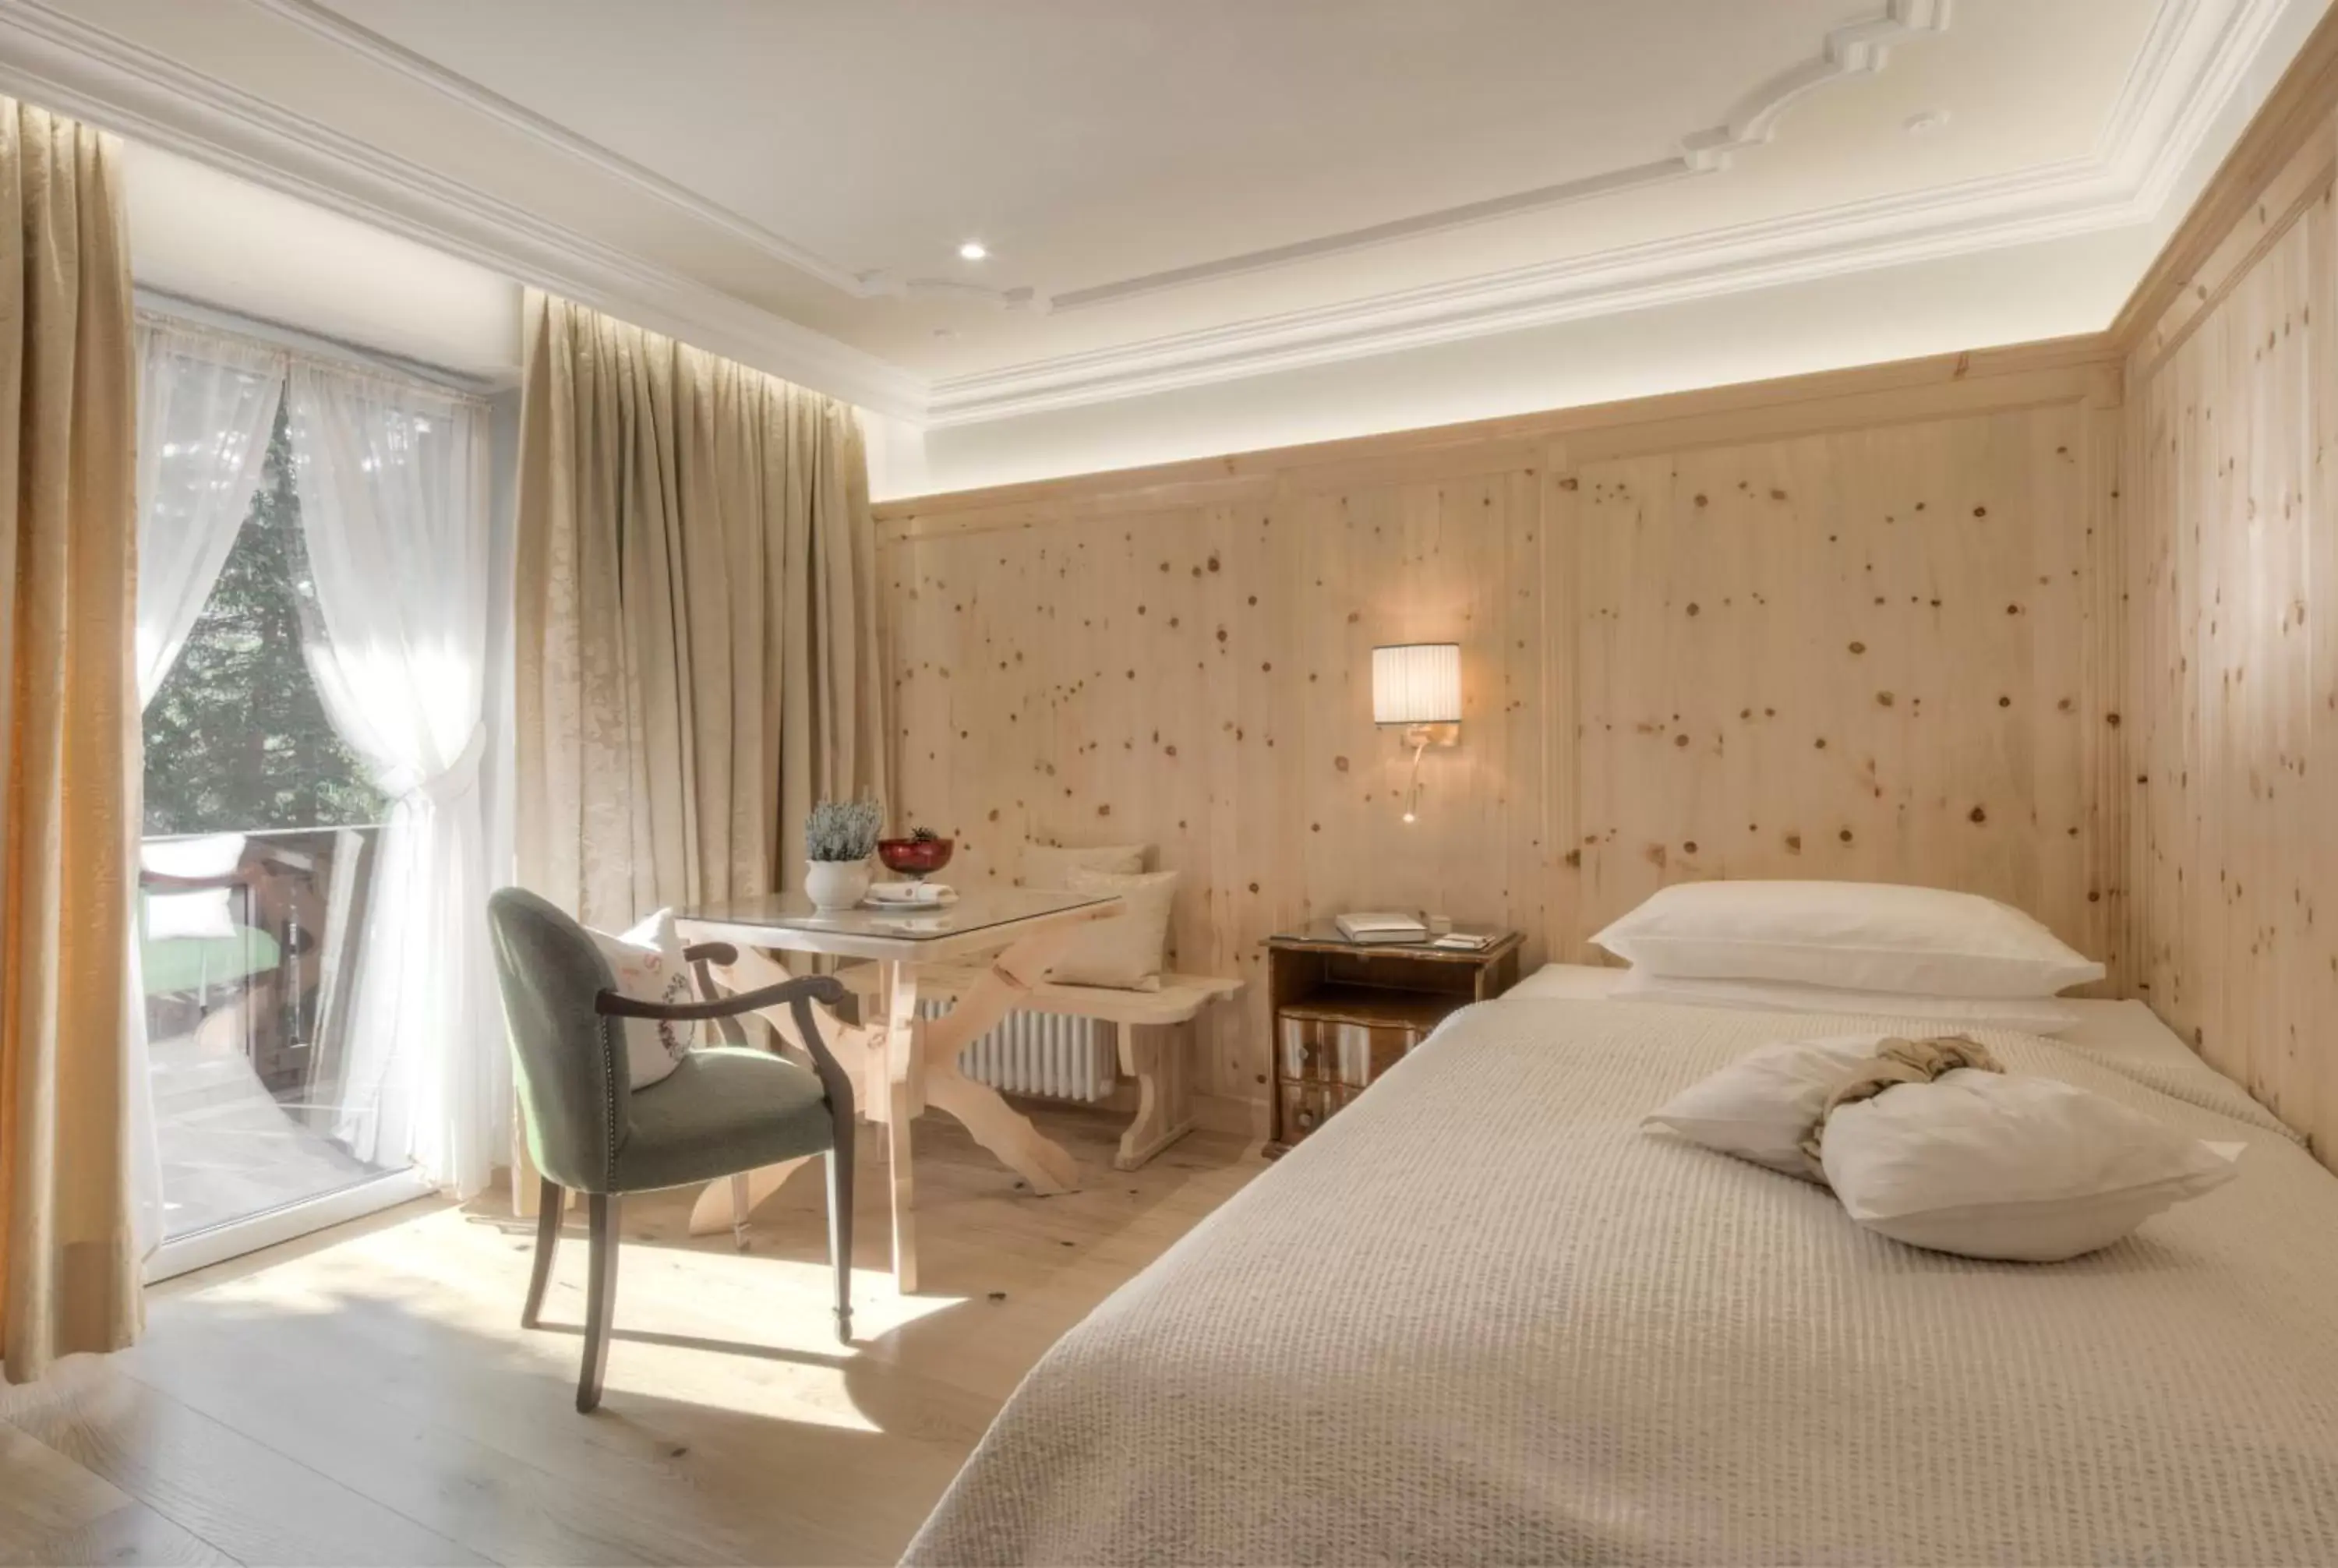 Bedroom in Hotel La Perla: The Leading Hotels of the World